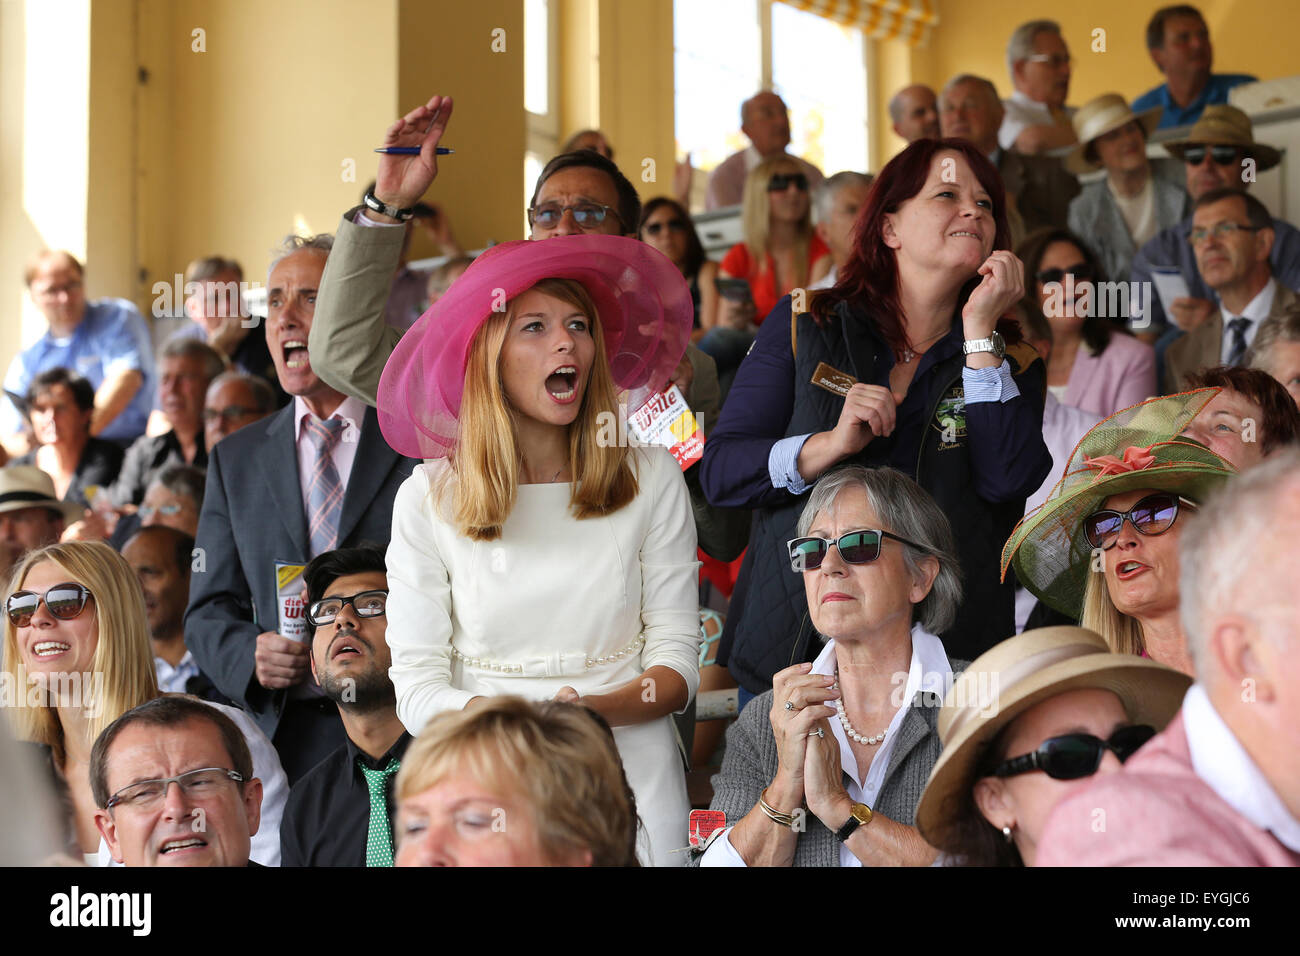 Iffezheim, Germany, people cheer when horse racing with Stock Photo